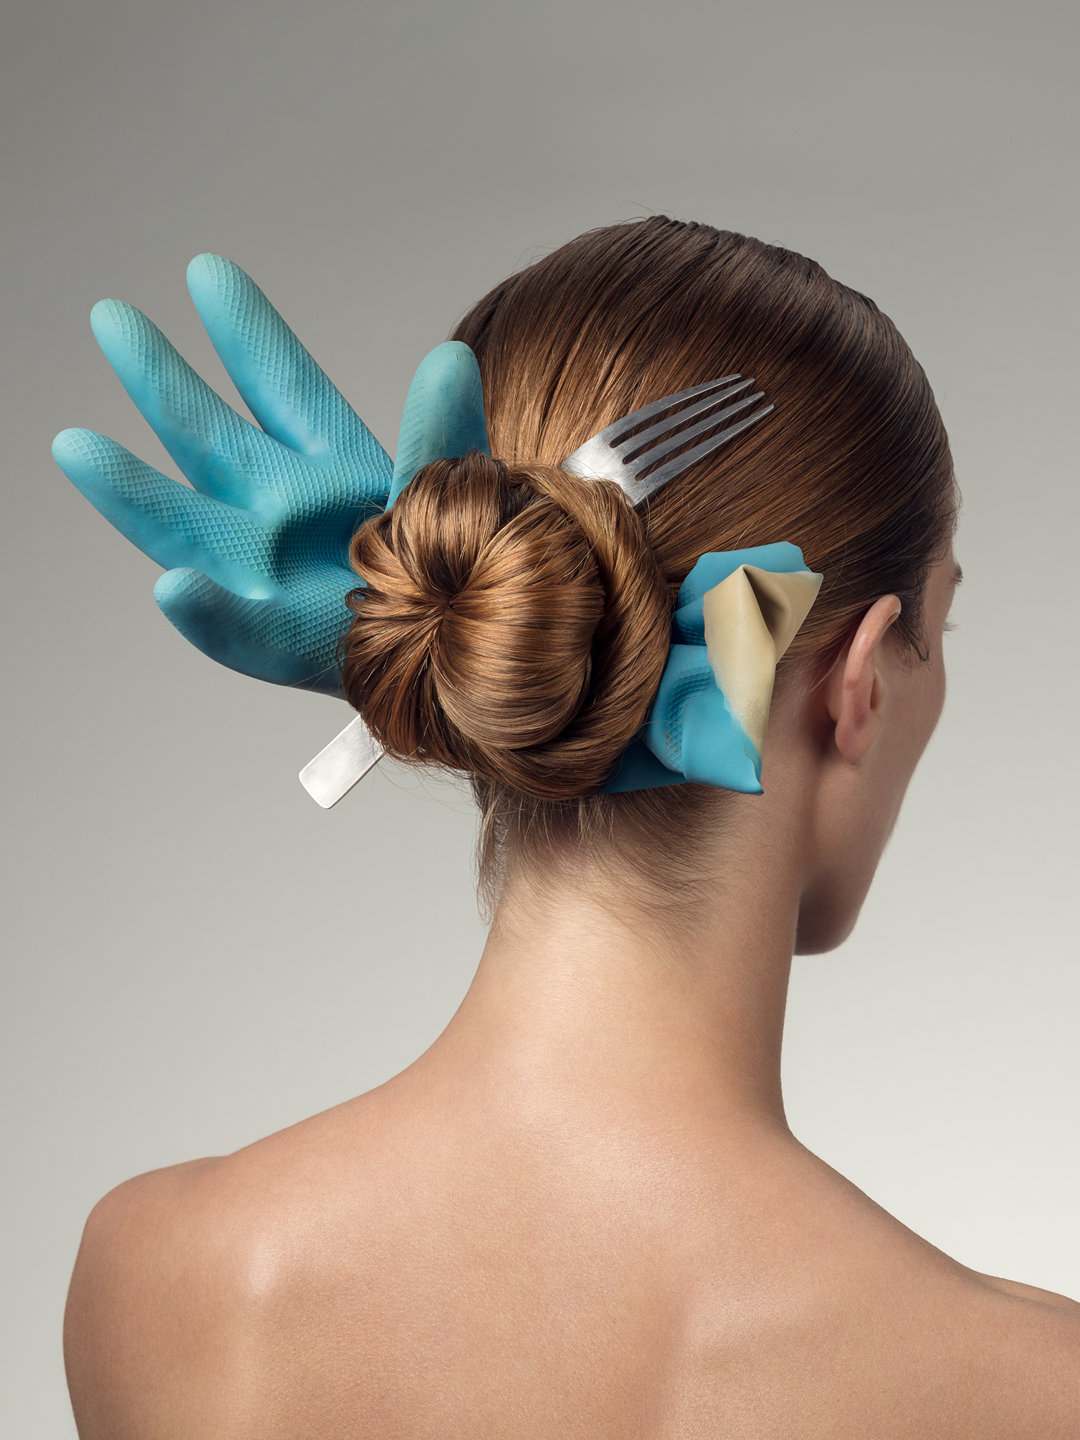 Woman's prison bun hairstyle with fork and used rubber glove